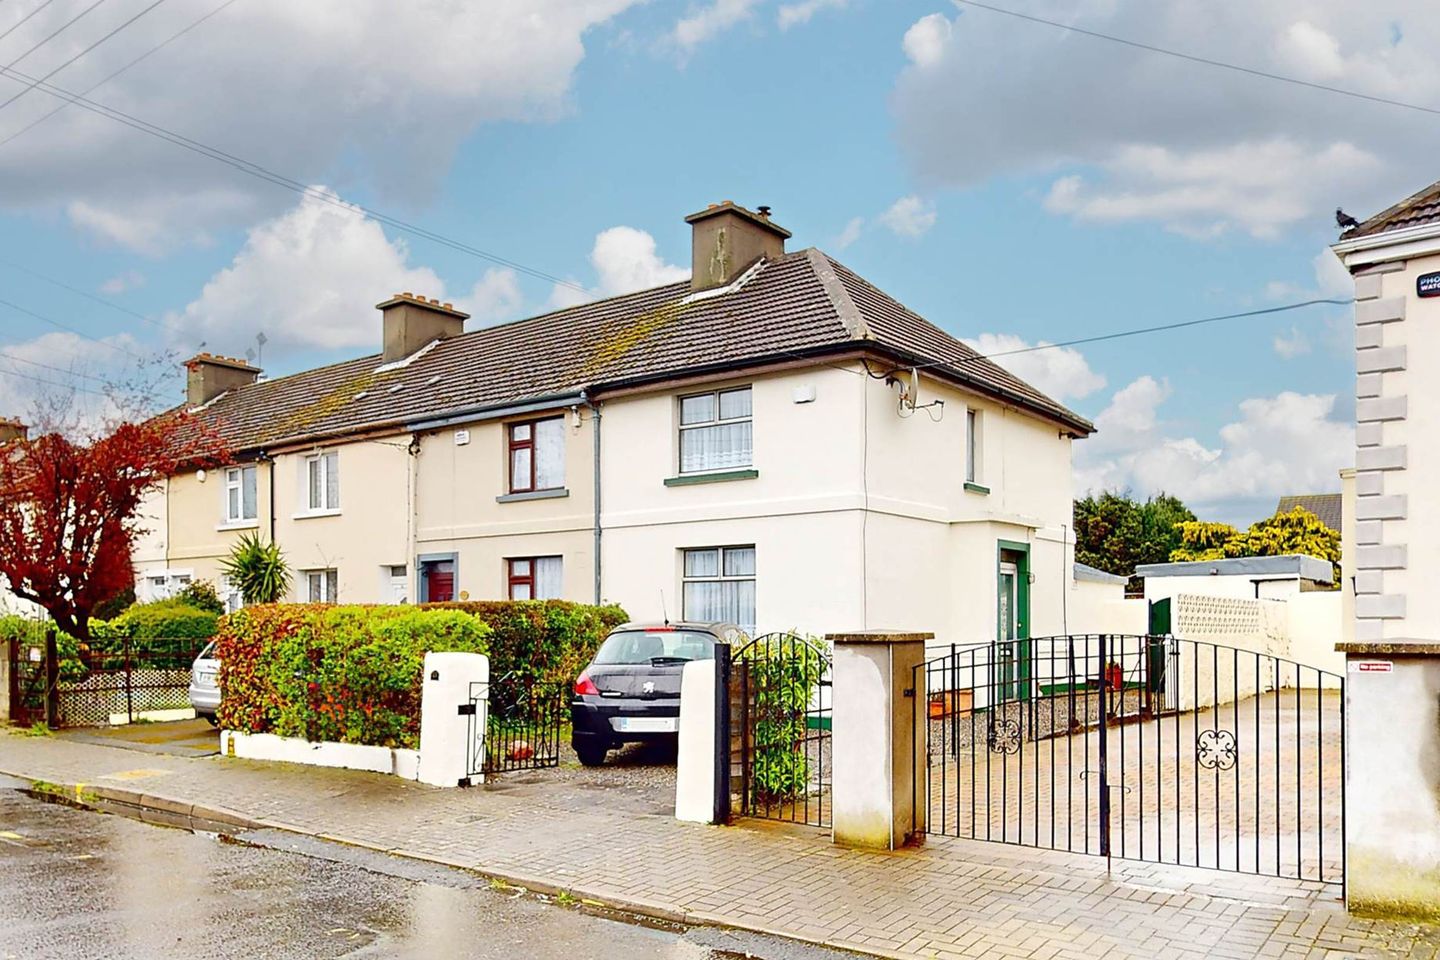 13 Wolfe Tone Square East, Bray, Co. Wicklow, A98K4C1